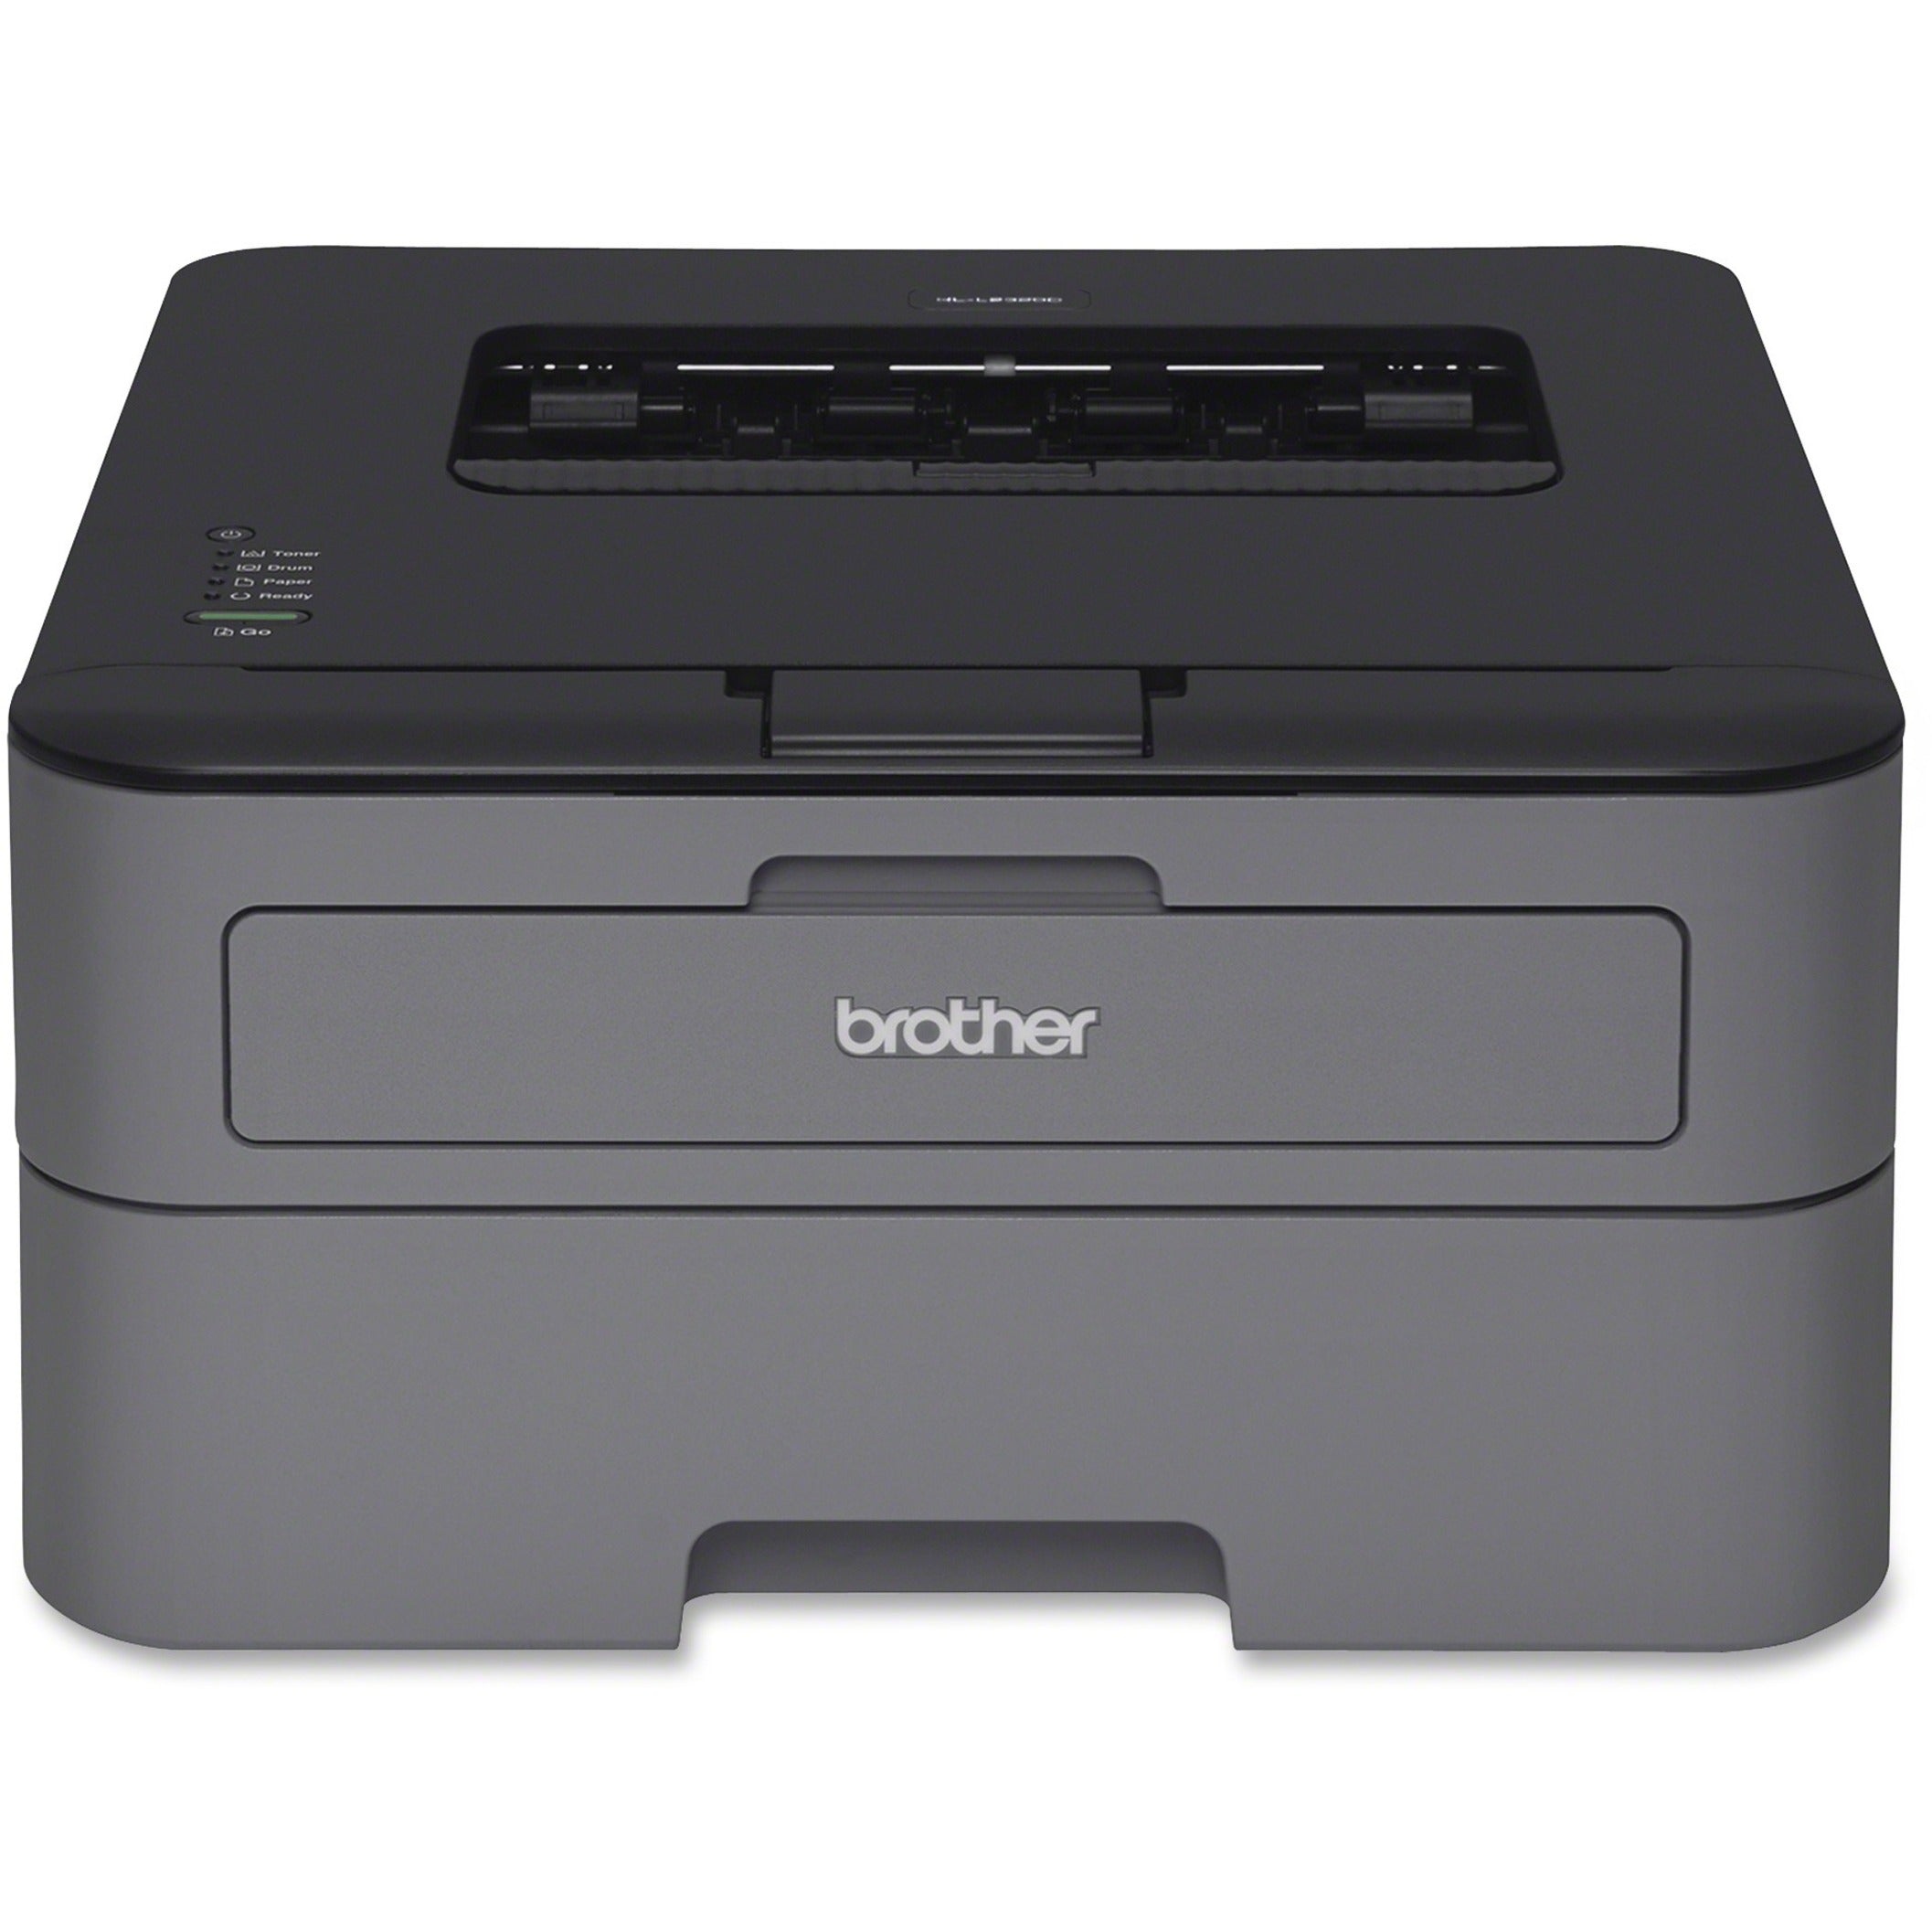 Brother HLL2320D HL-L2320D Compact, Personal Laser Printer with Duplex - Monochrome, 30 ppm, 2400 x 600 dpi